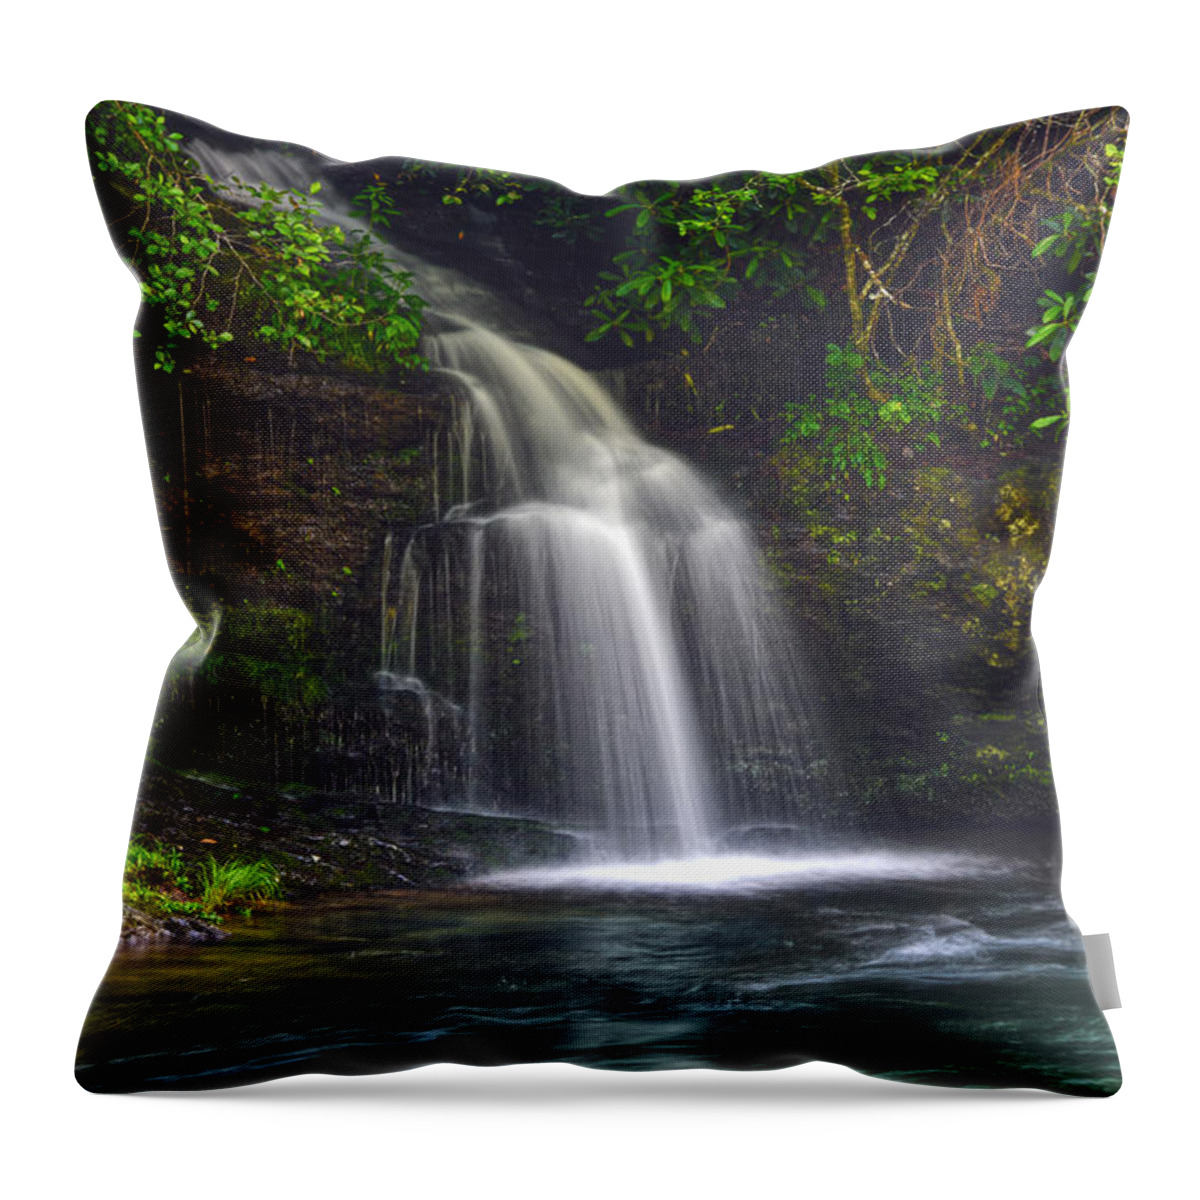 Waterfall Throw Pillow featuring the photograph Waterfall On Little River by Phil Perkins